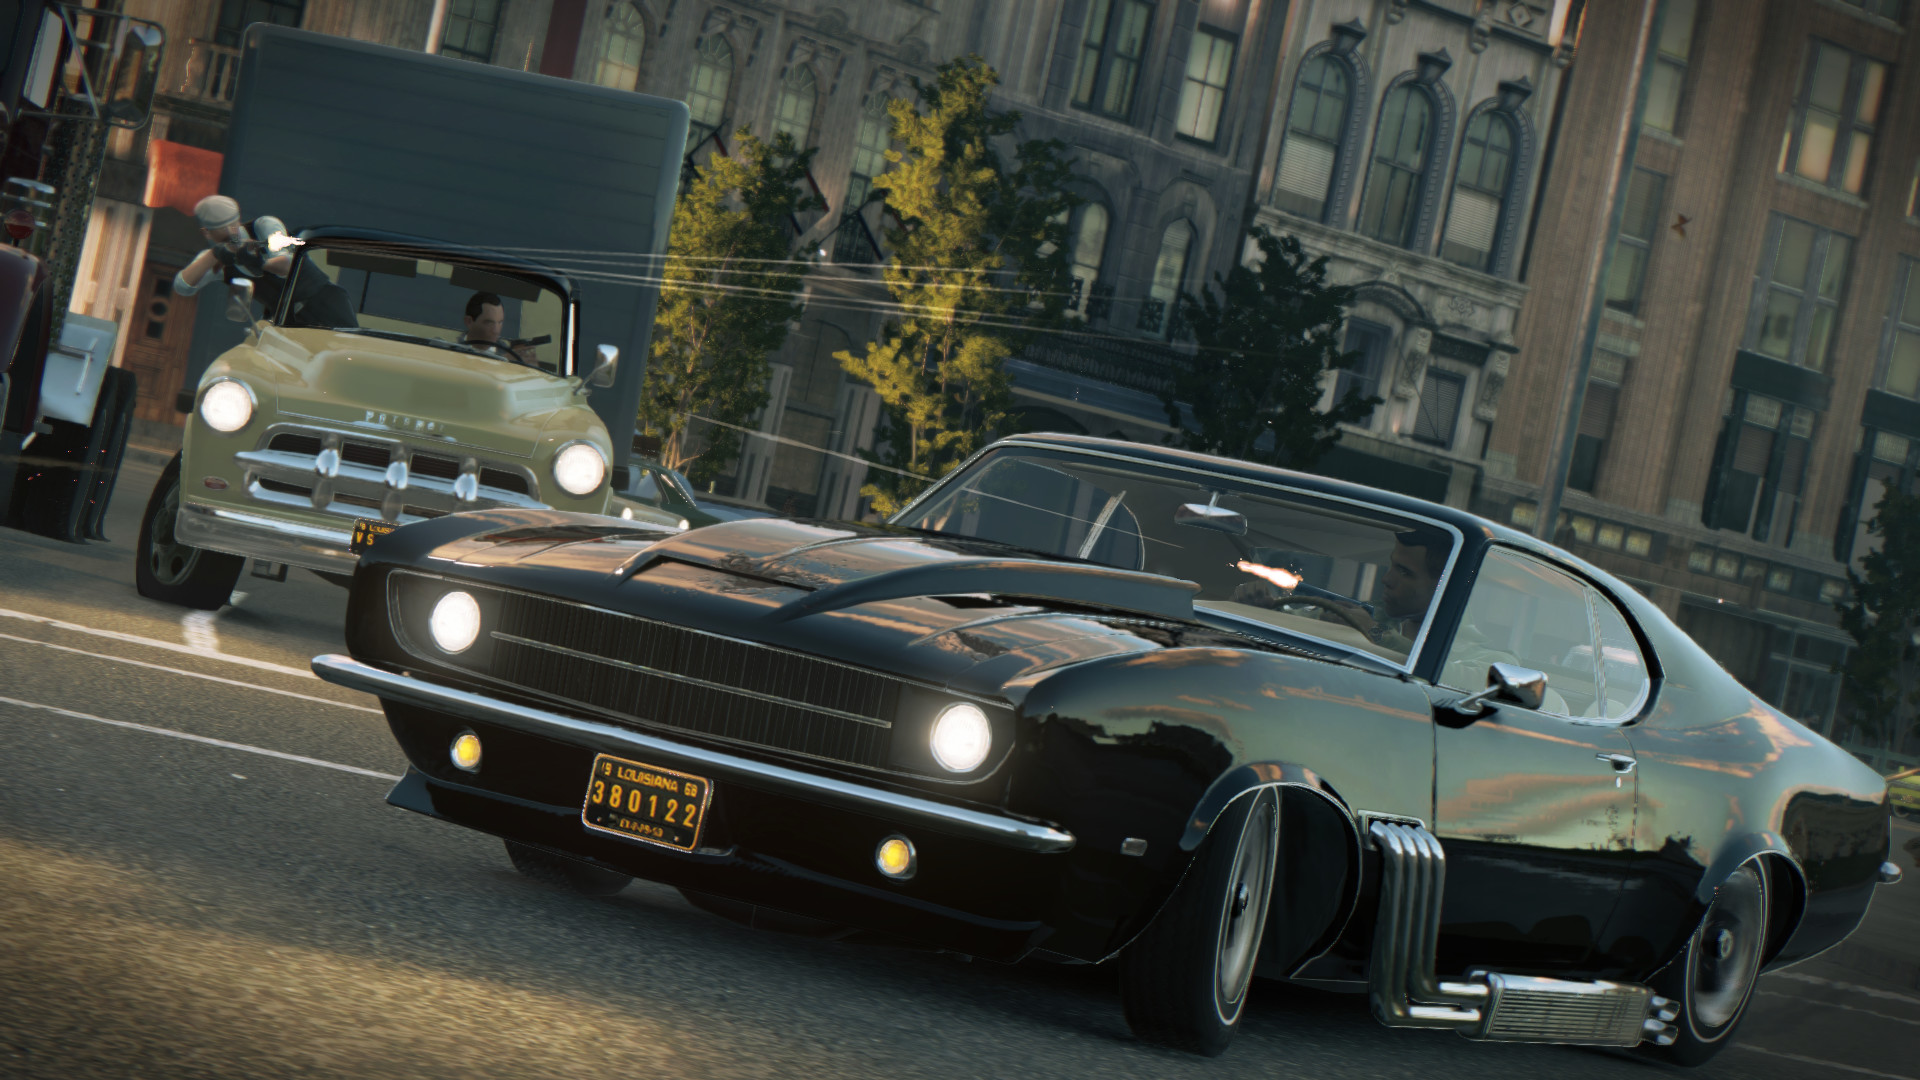 Mafia III: Faster, Baby! - SteamSpy - All the data and stats about Steam  games